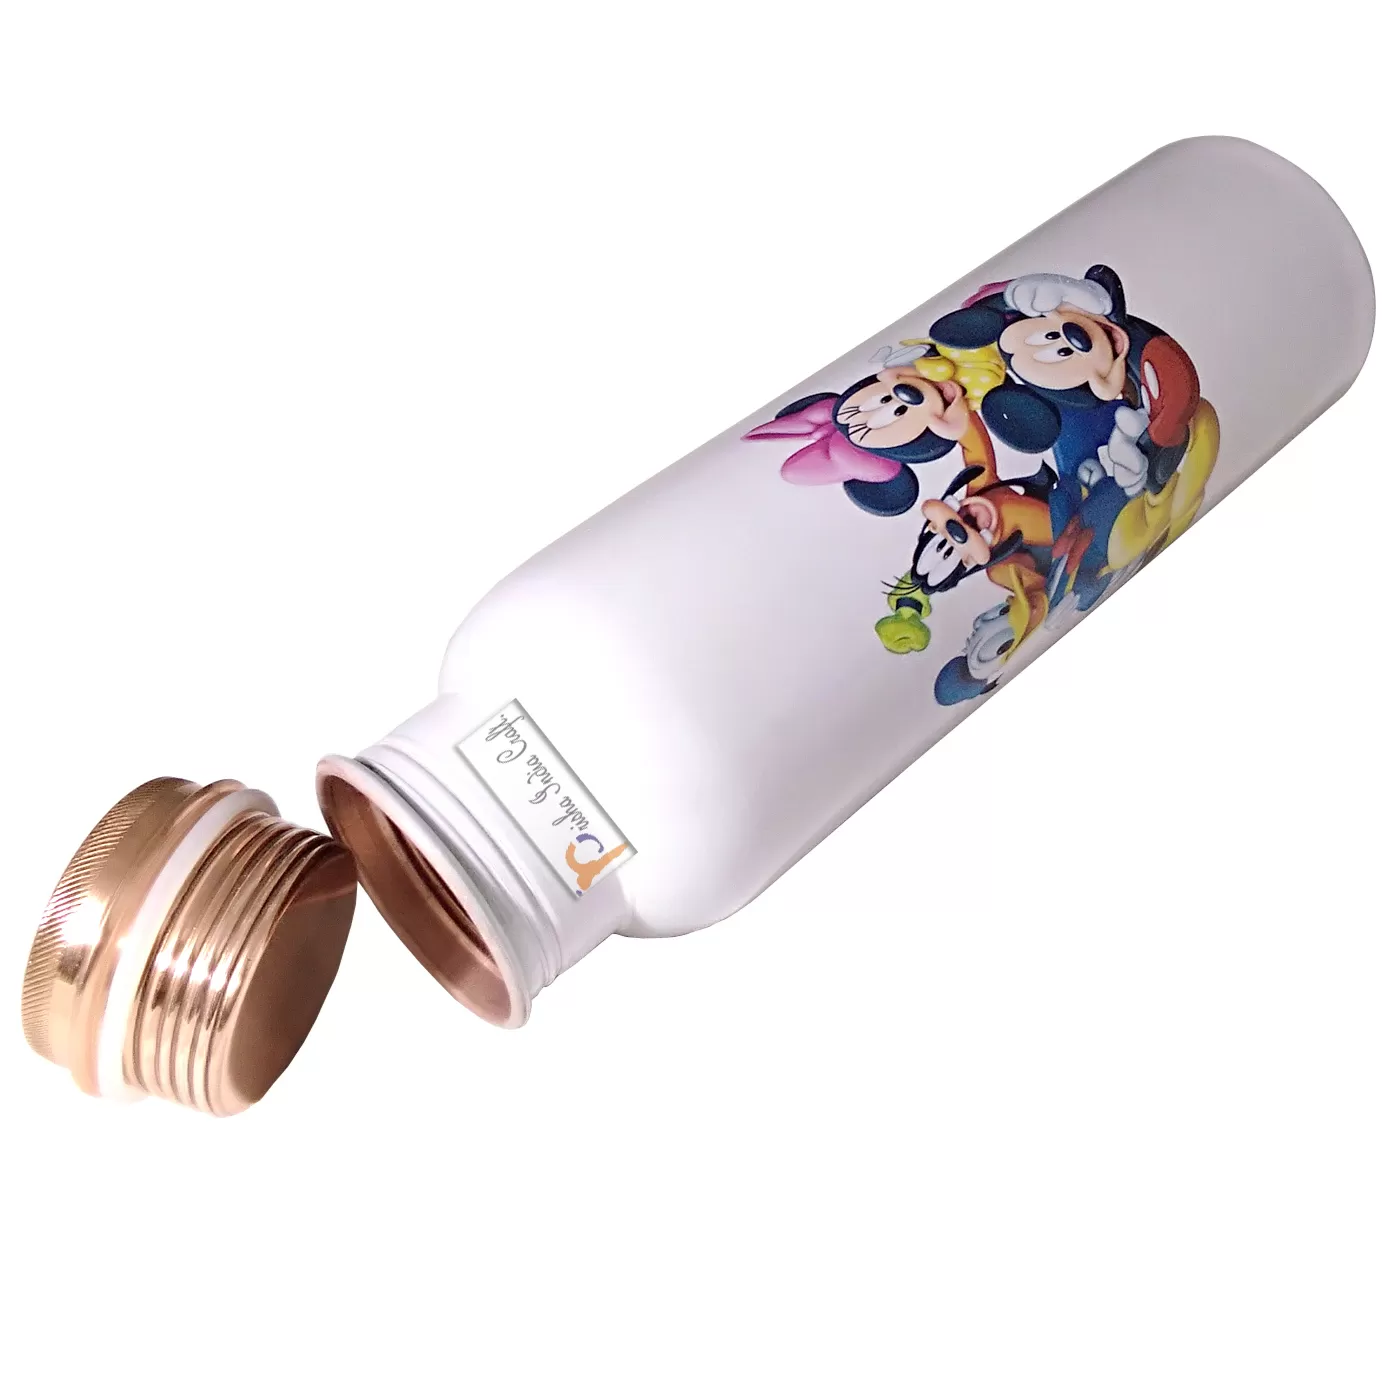 Digital Printed Pure Copper Water Bottle Kids School Water Bottle Mickey Mouse and Donald Design, 1000 ML |Set of 2, 3 image